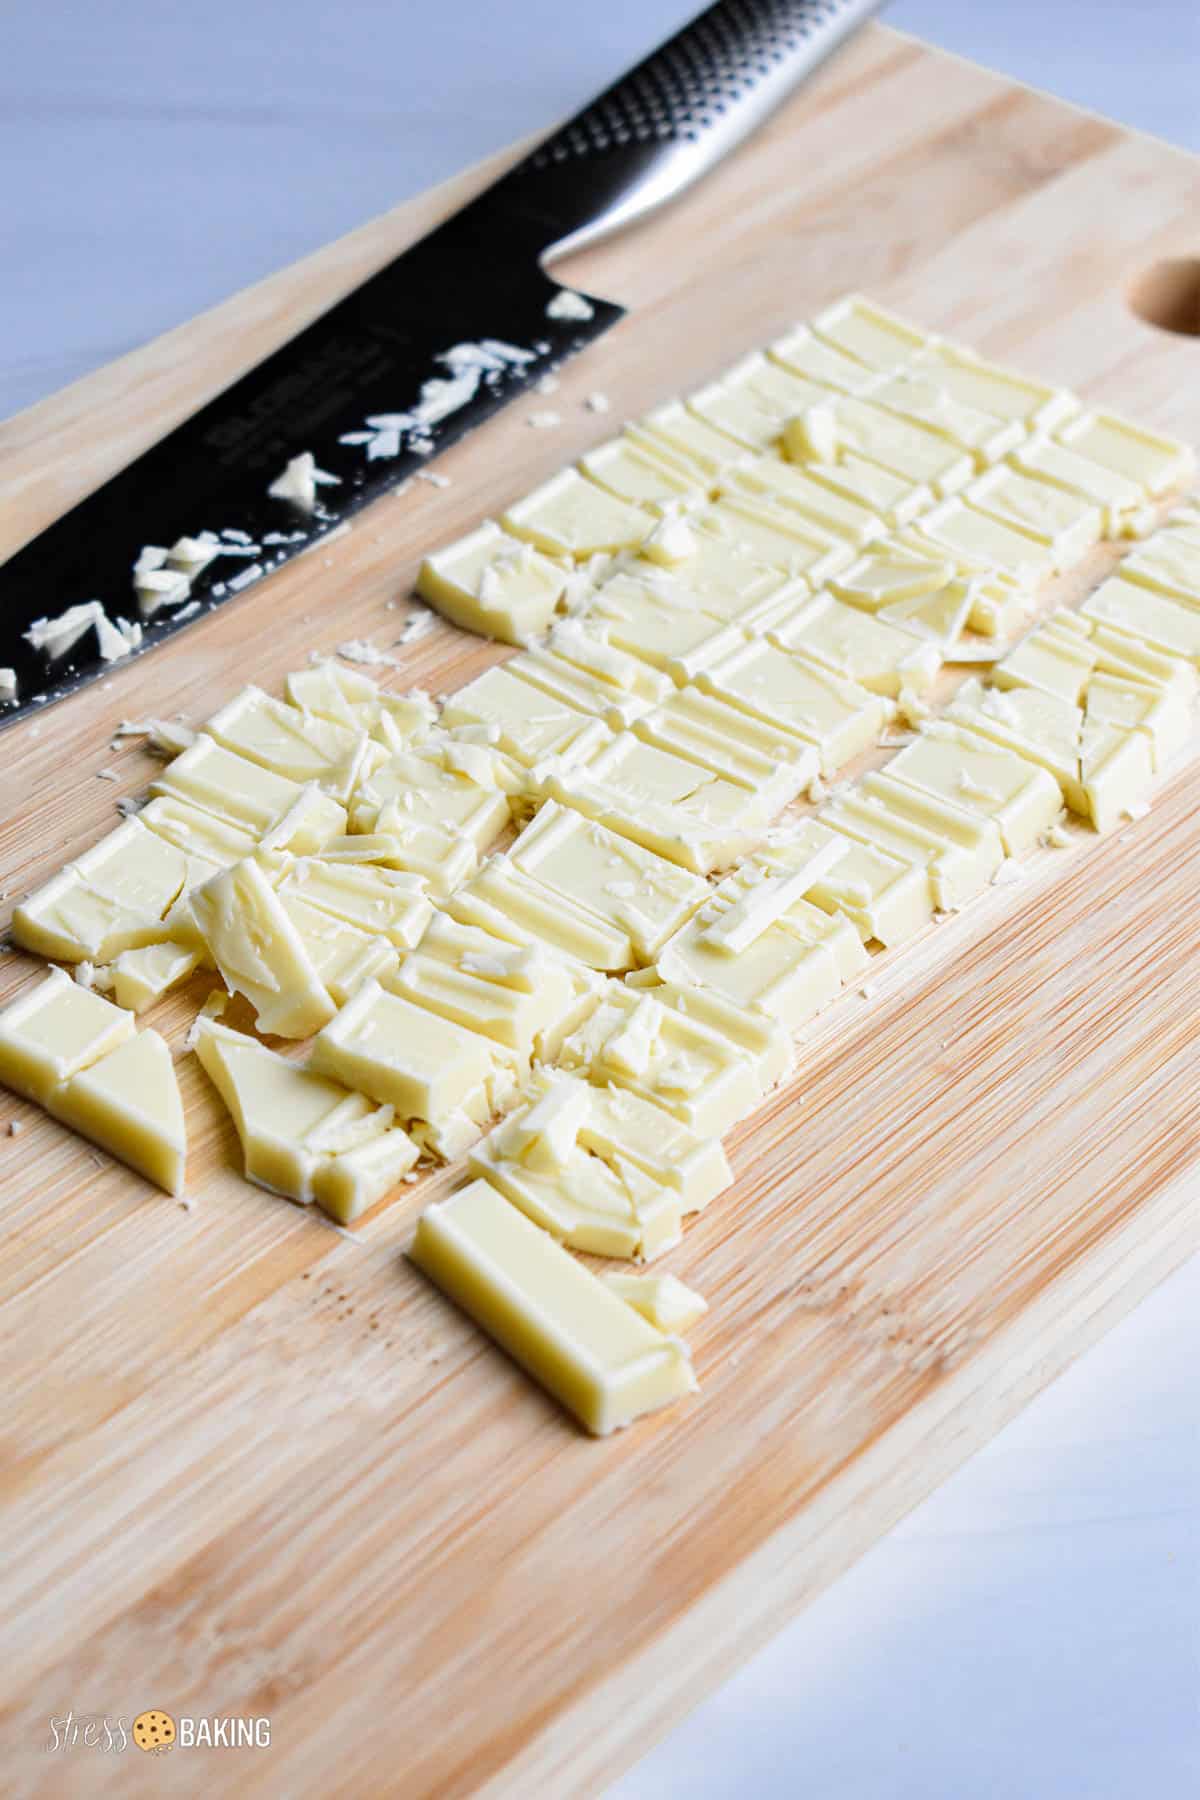 Chopped white chocolate bar on a cutting board with a chef's knife